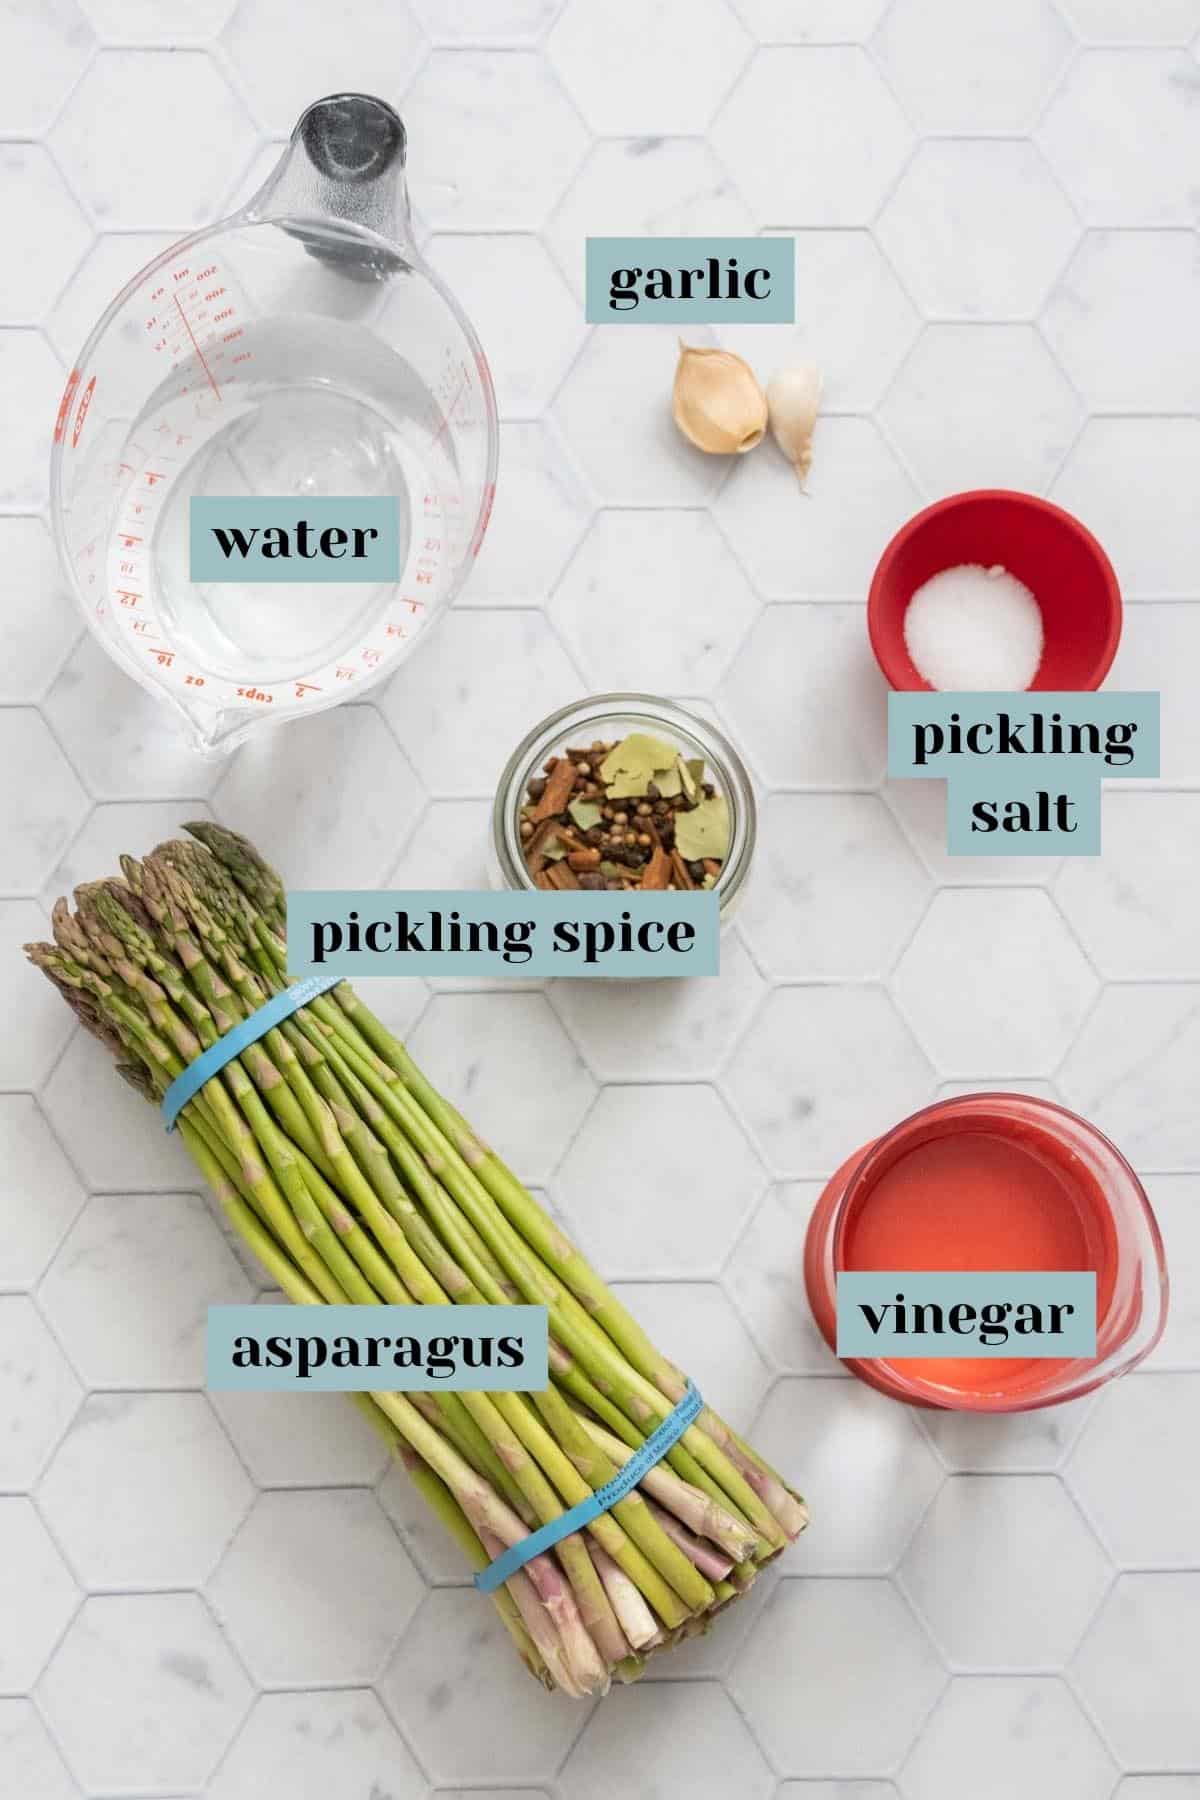 Ingredients for pickled asparagus on a tile surface with labels.